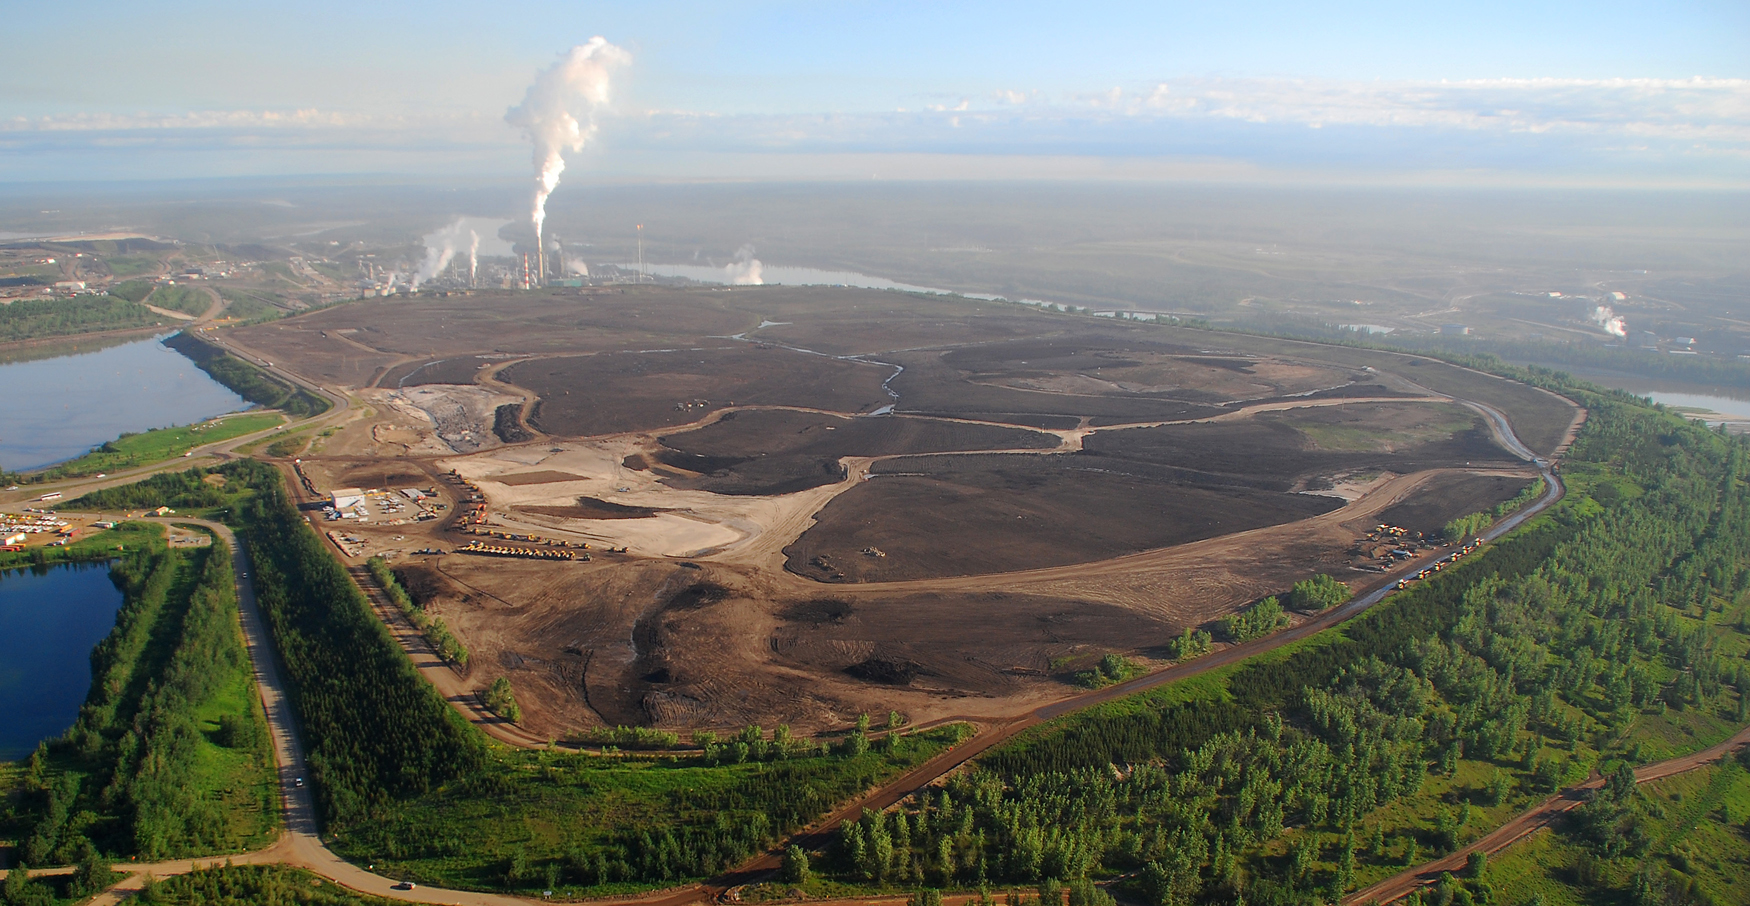 A view of Wapisiw Lookout (formerly Pond 1) in June 2010 at Suncor Energy oilsands operation